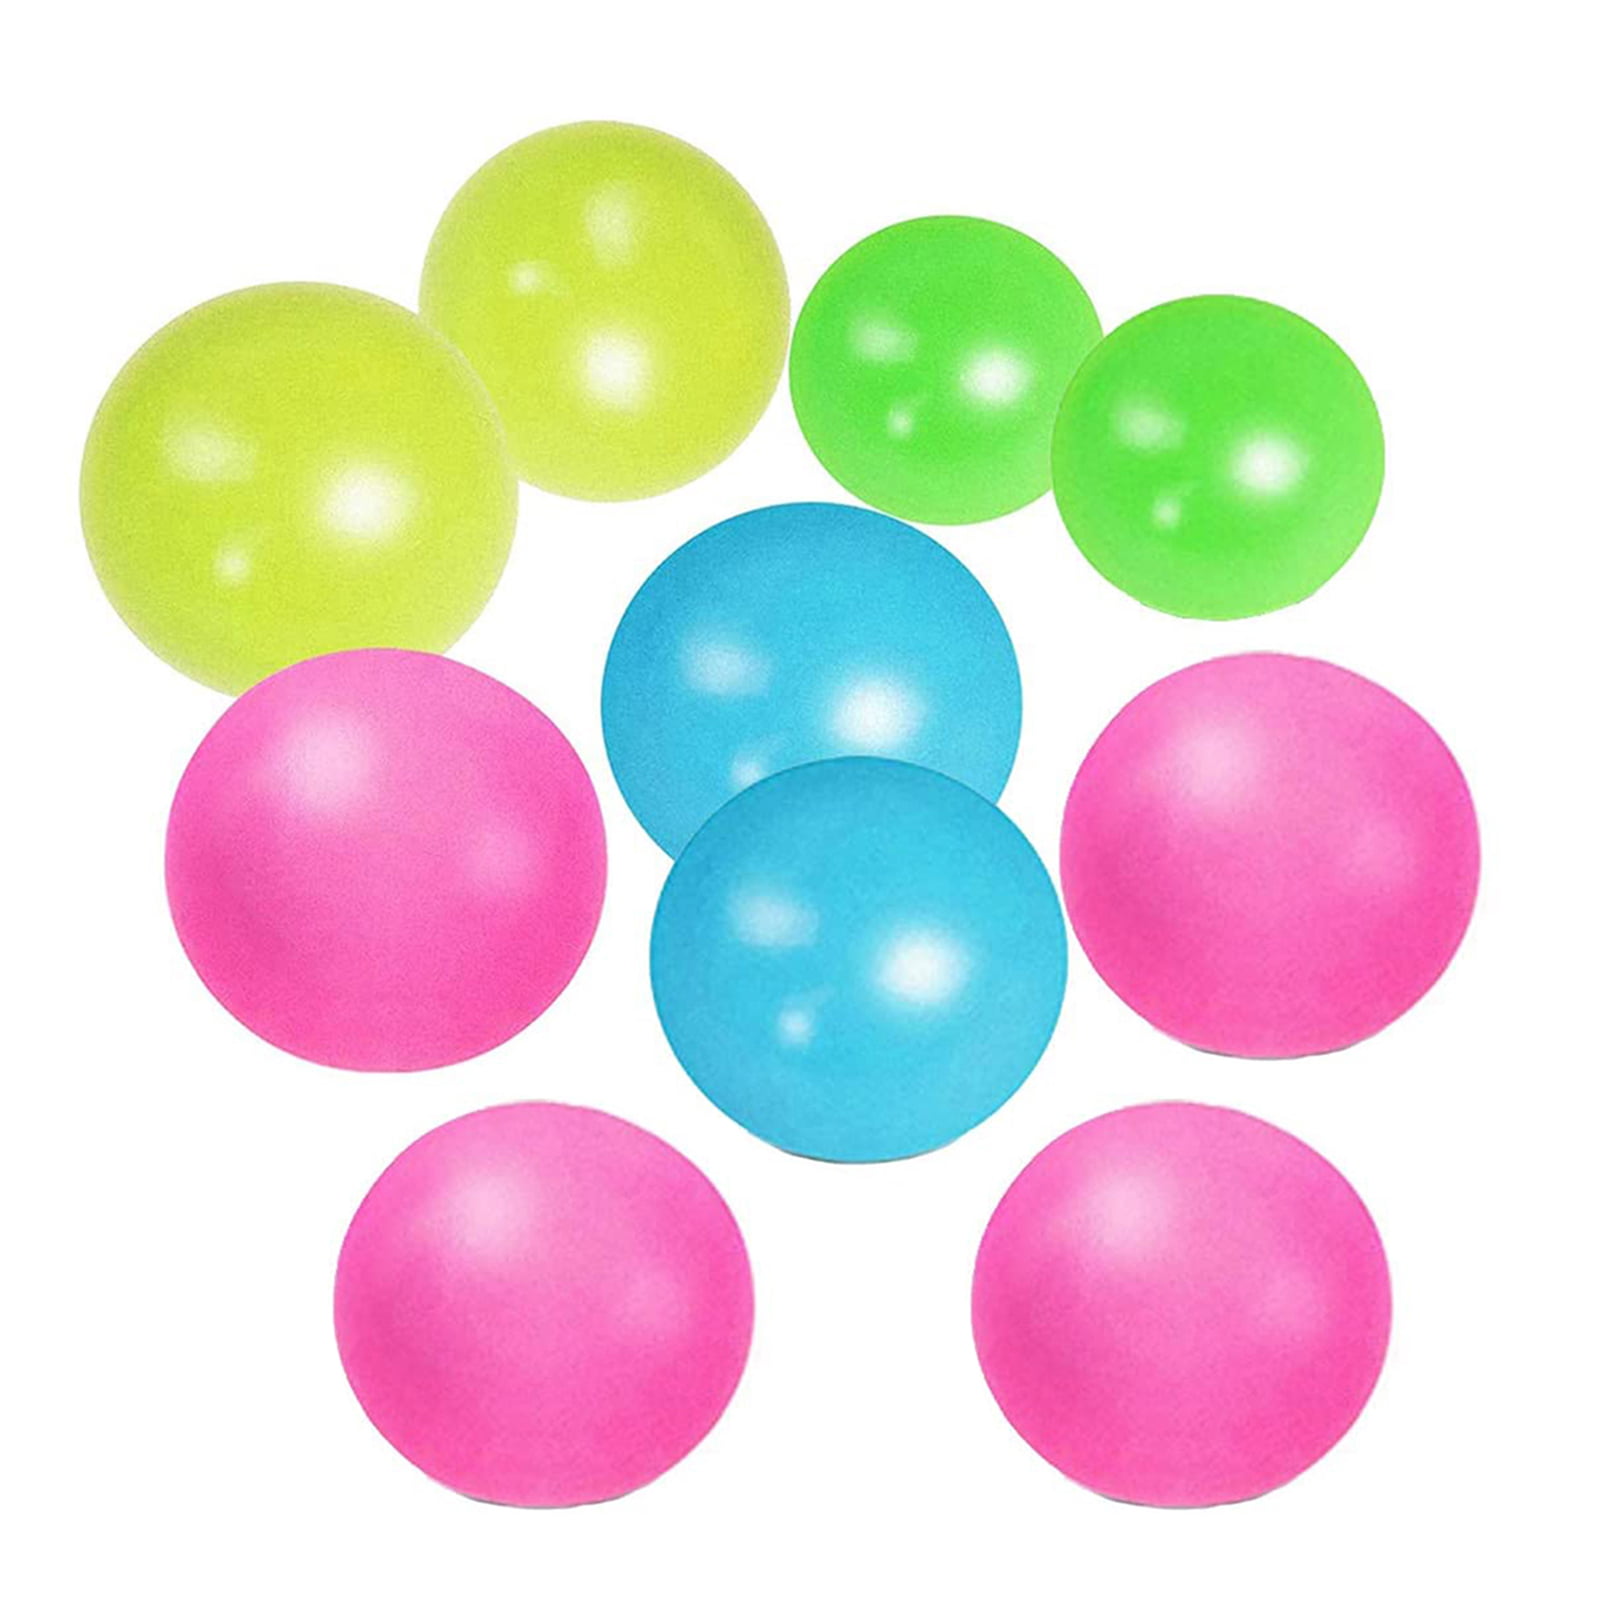 10PCS Sticky Wall Ball for Ceiling Stress Relief Globbles Squishy Kid Adult Toy. 